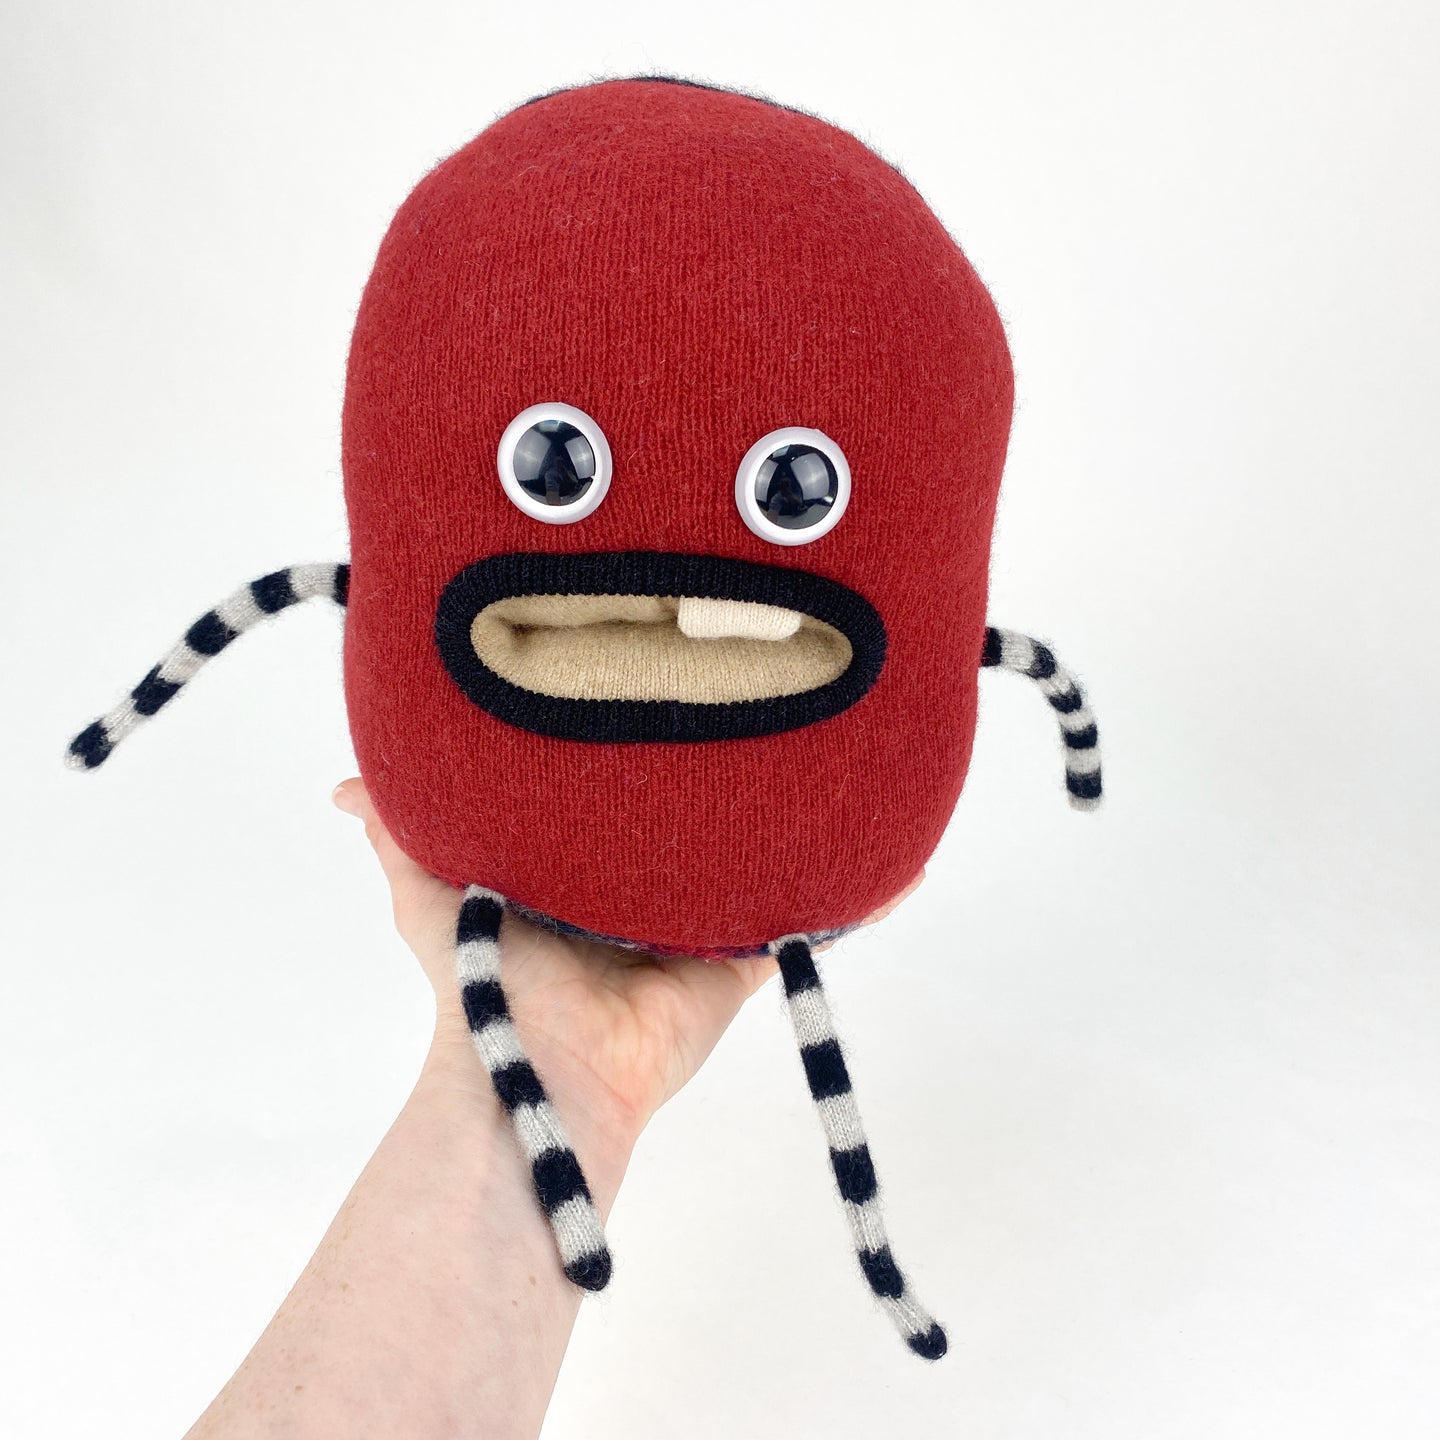 Zoodle the handmade stuffed monster plush